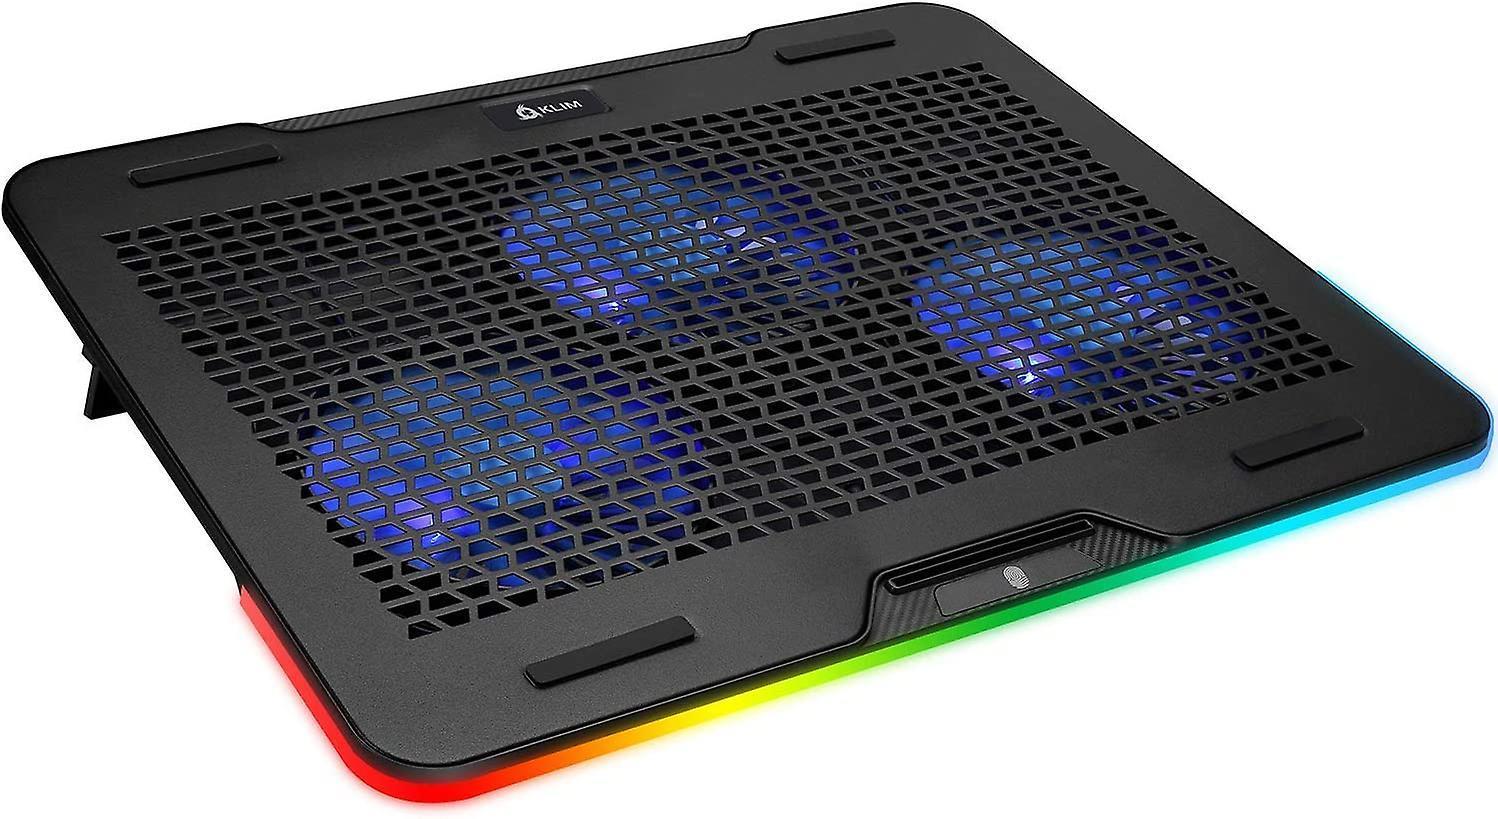 Laptop Cooler Rgb Lighting Gaming Laptop Holder Usb Fan Stable And Rugged